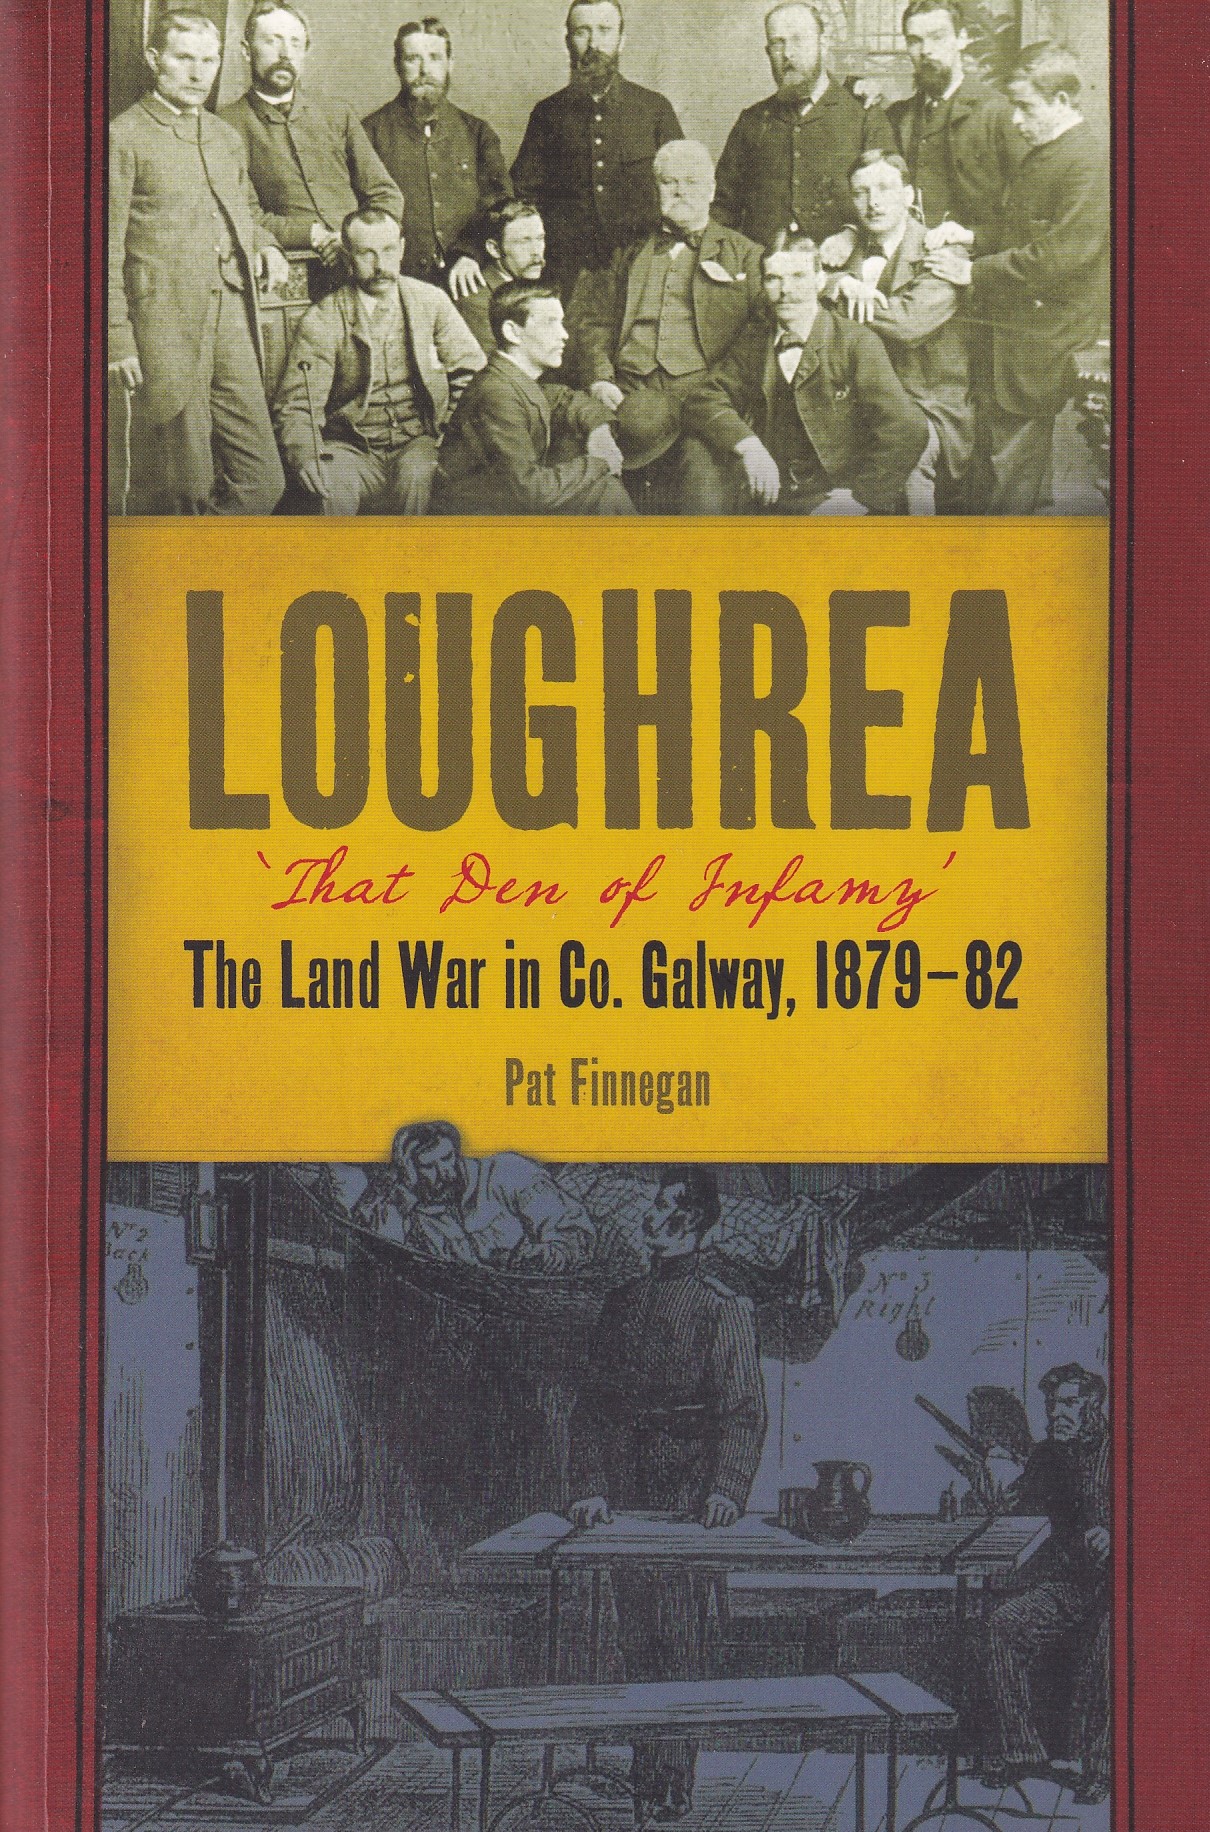 Loughrea, That Den of Infamy: The Land War in County Galway, 1879-82 [SIGNED] | Pat Finnegan | Charlie Byrne's